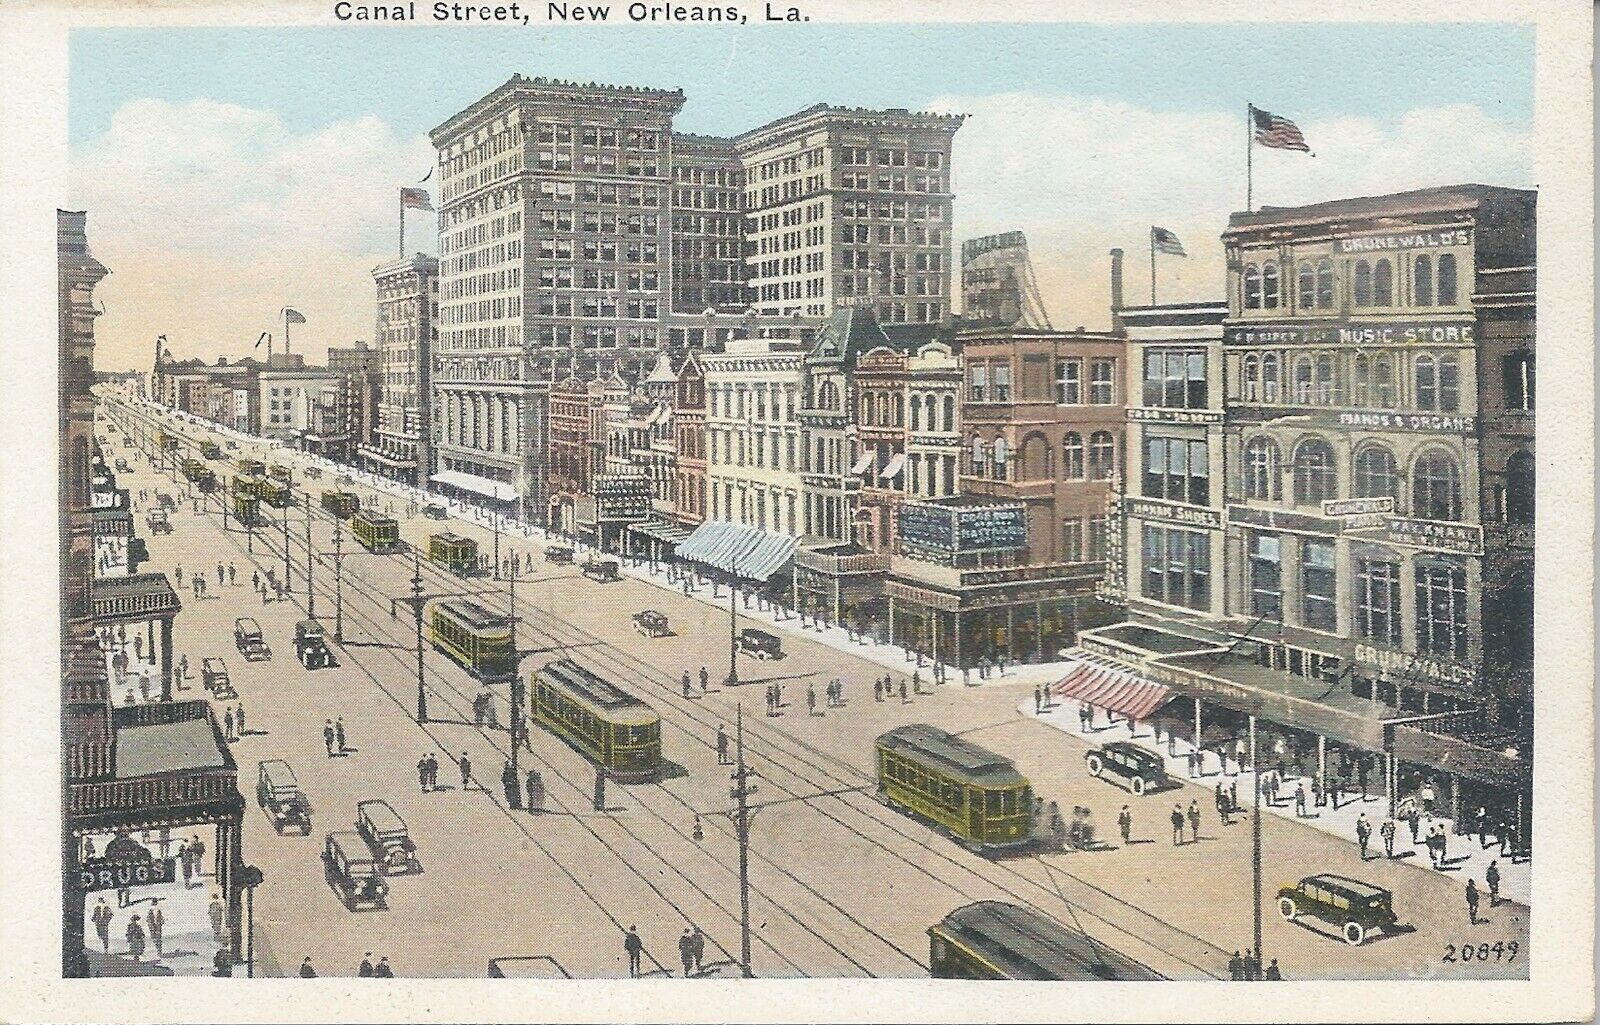 View of Canal Street, New Orleans, Louisiana, Early Postcard, Unused